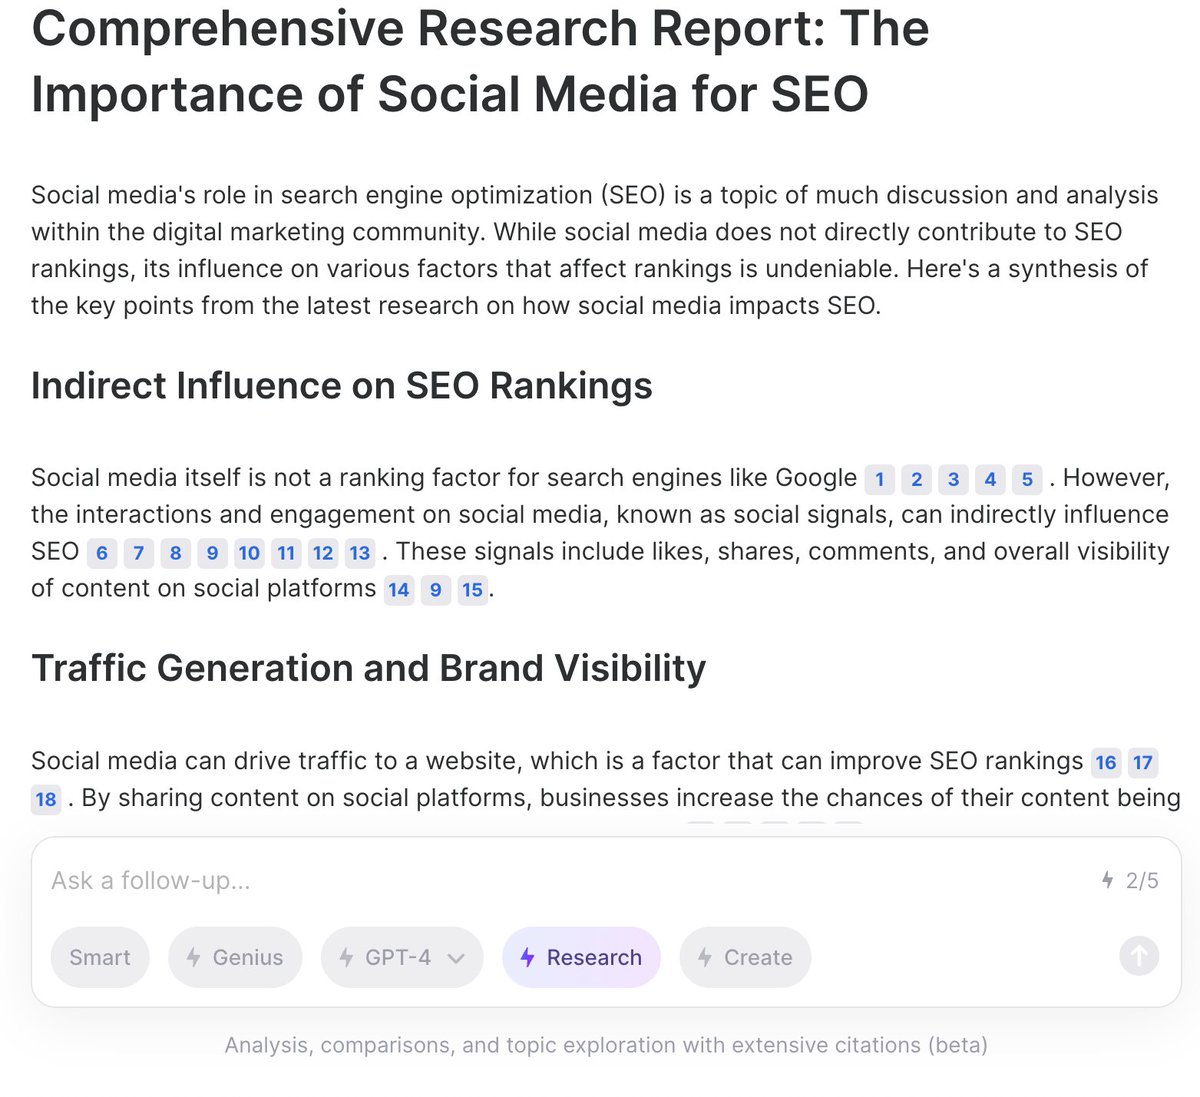 The best AI tool for blogging isn’t ChatGPT. It isn’t Gemini, either. Check this out. So, I asked this platform called youDOTcom a question like… “How important is social media for SEO?” It then shows me what queries it is searching for to get the answer and the sources it…